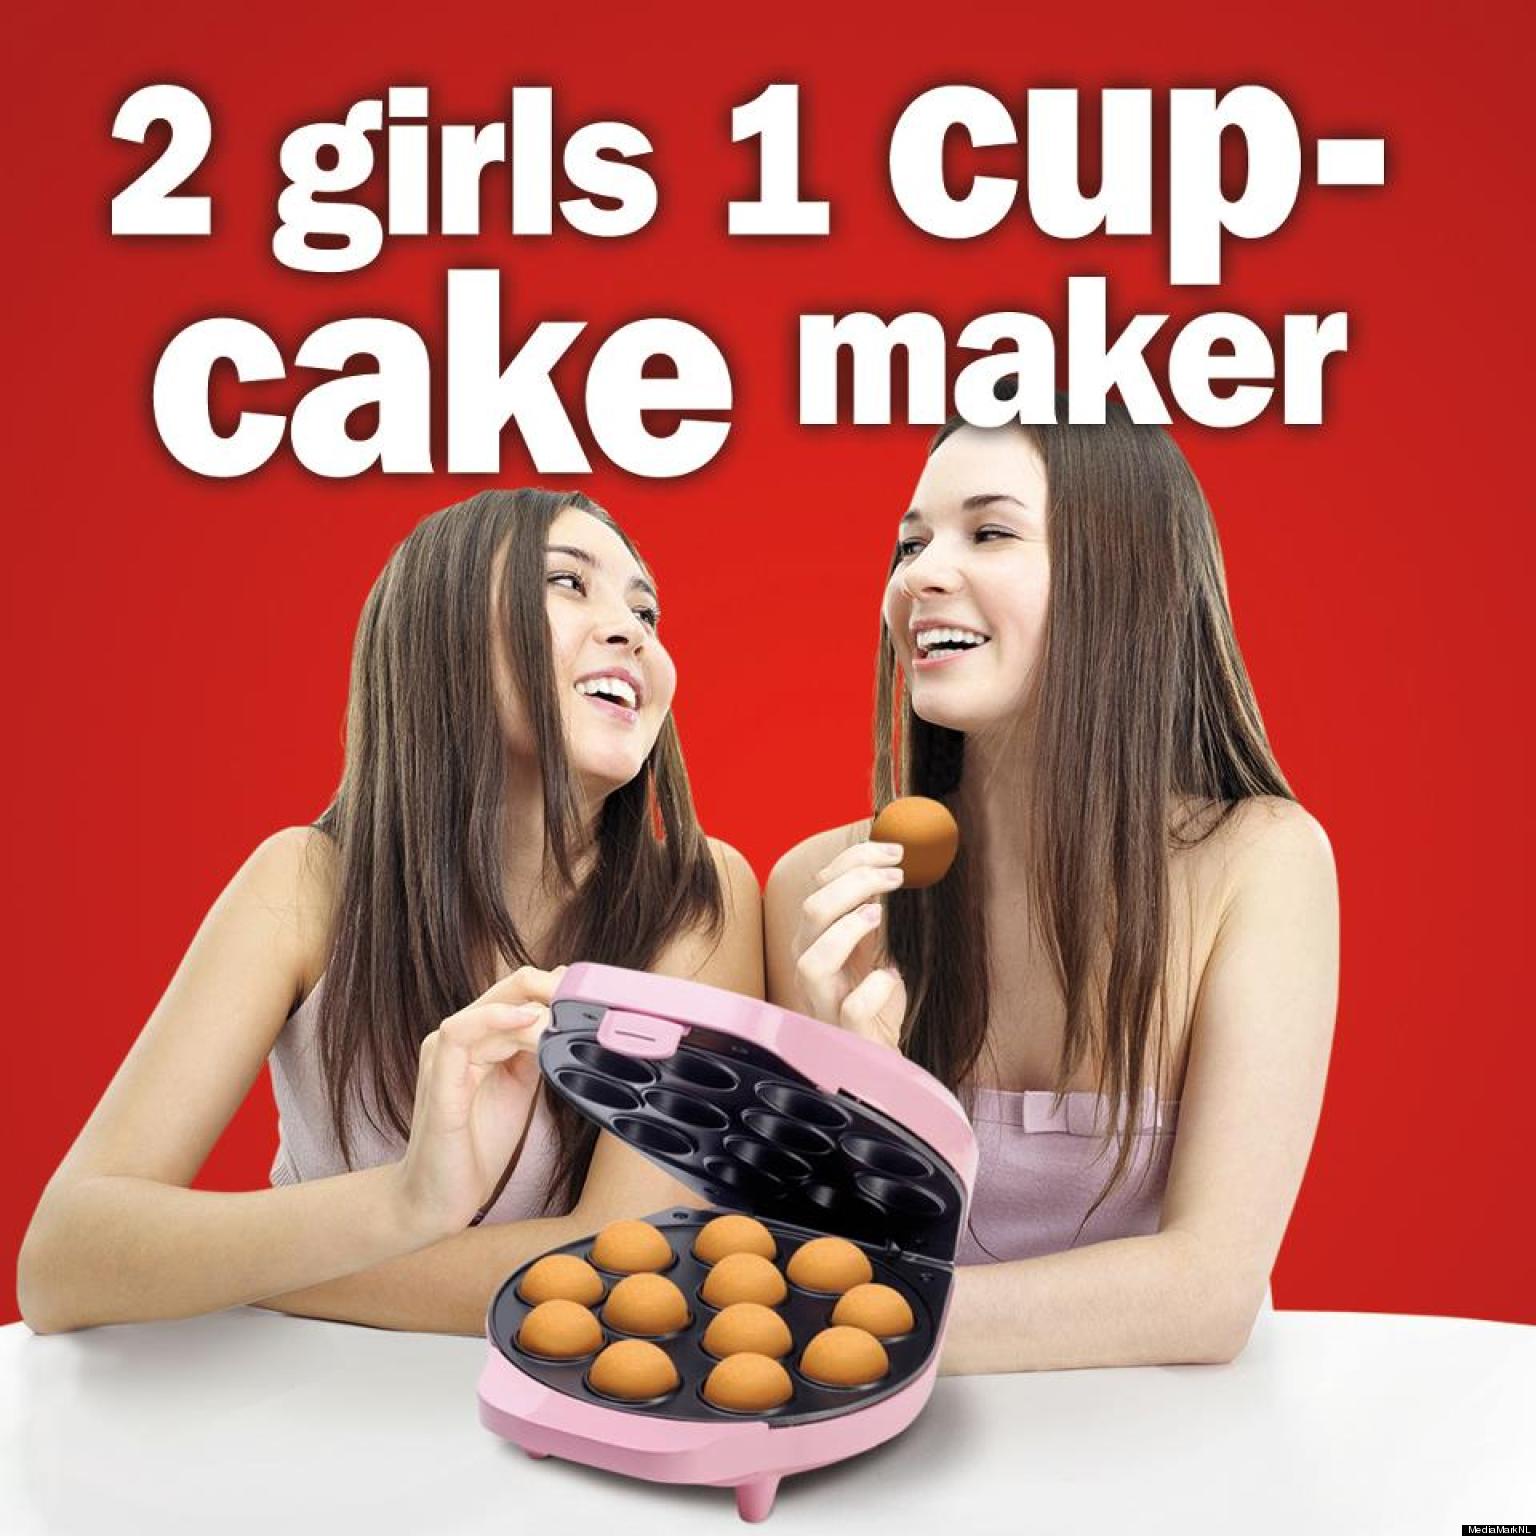 2 Girls 1 Cup Cake Maker Is Not What You Think Photo Huffpost 